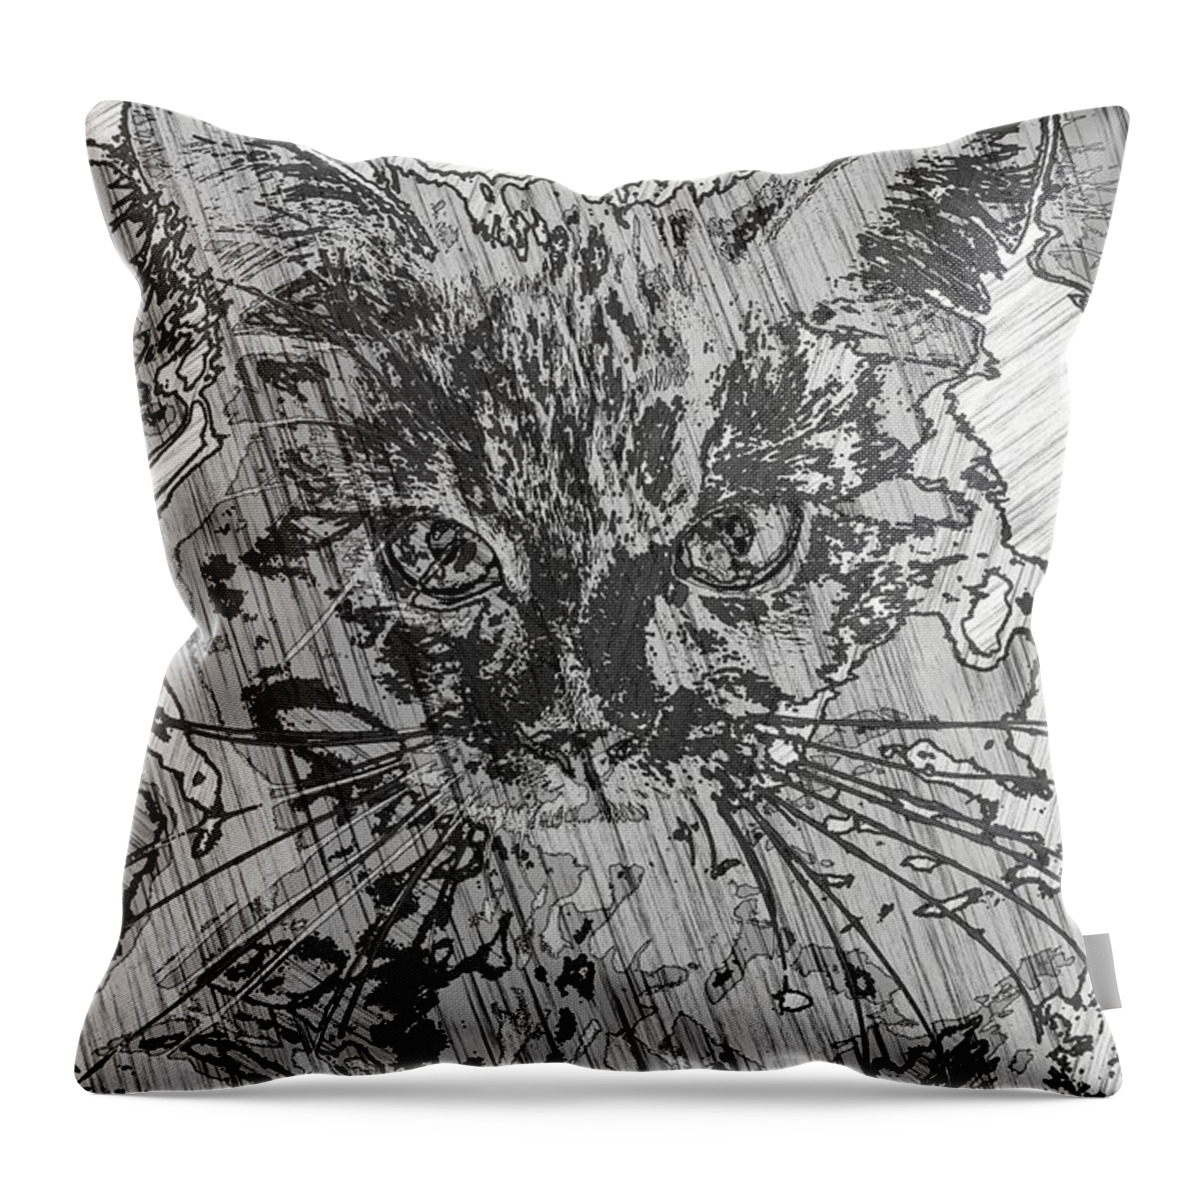 Super Duper Throw Pillow featuring the digital art Super Duper Cool Cat Sketch by Don Northup